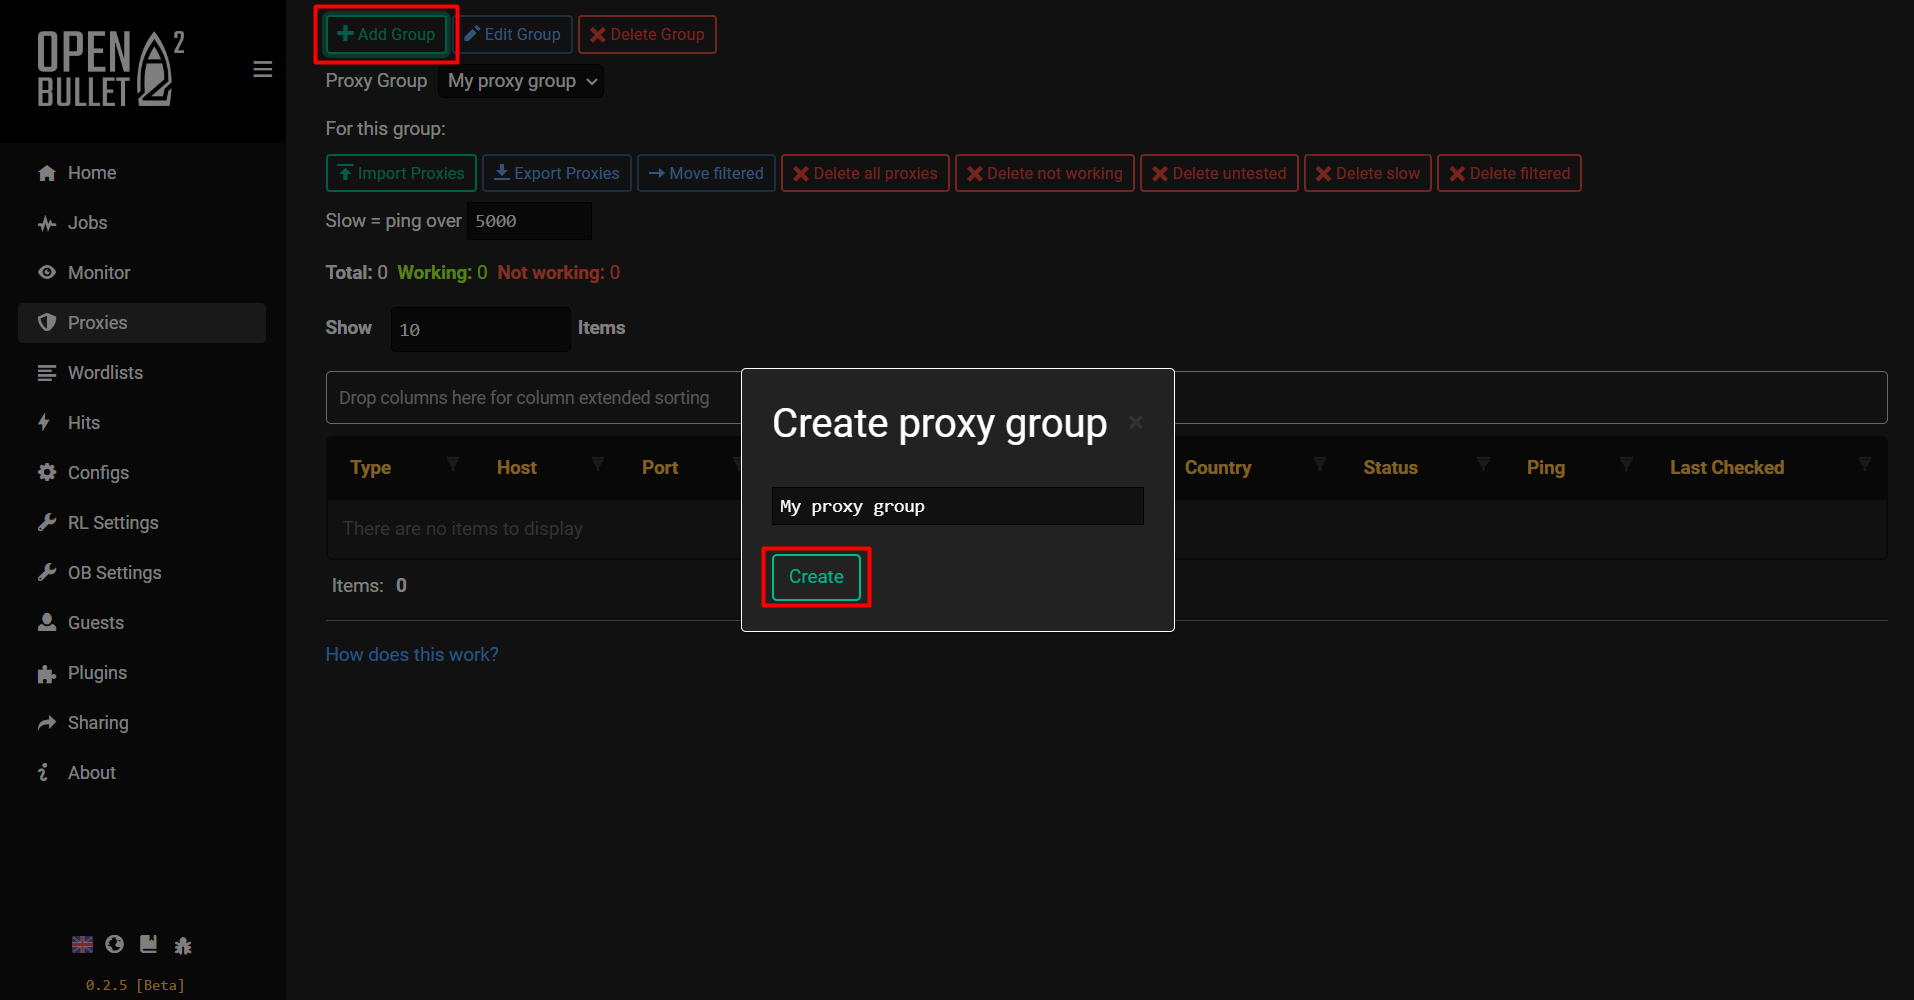 OpenBullet2 - Create a proxy group